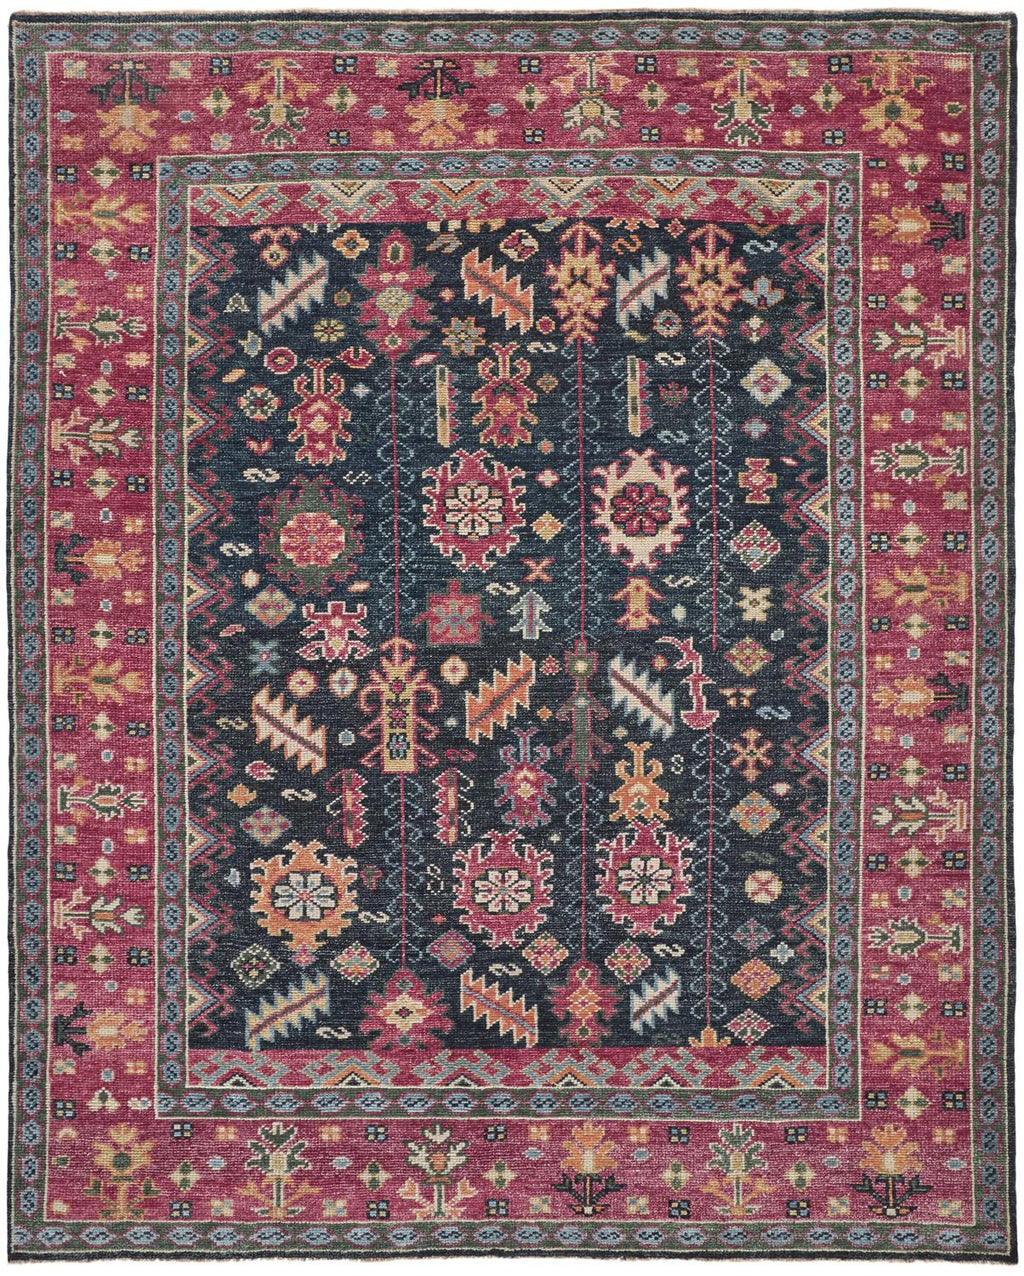 2' X 3' Pink Blue And Orange Wool Floral Hand Knotted Distressed Stain Resistant Area Rug With Fringe